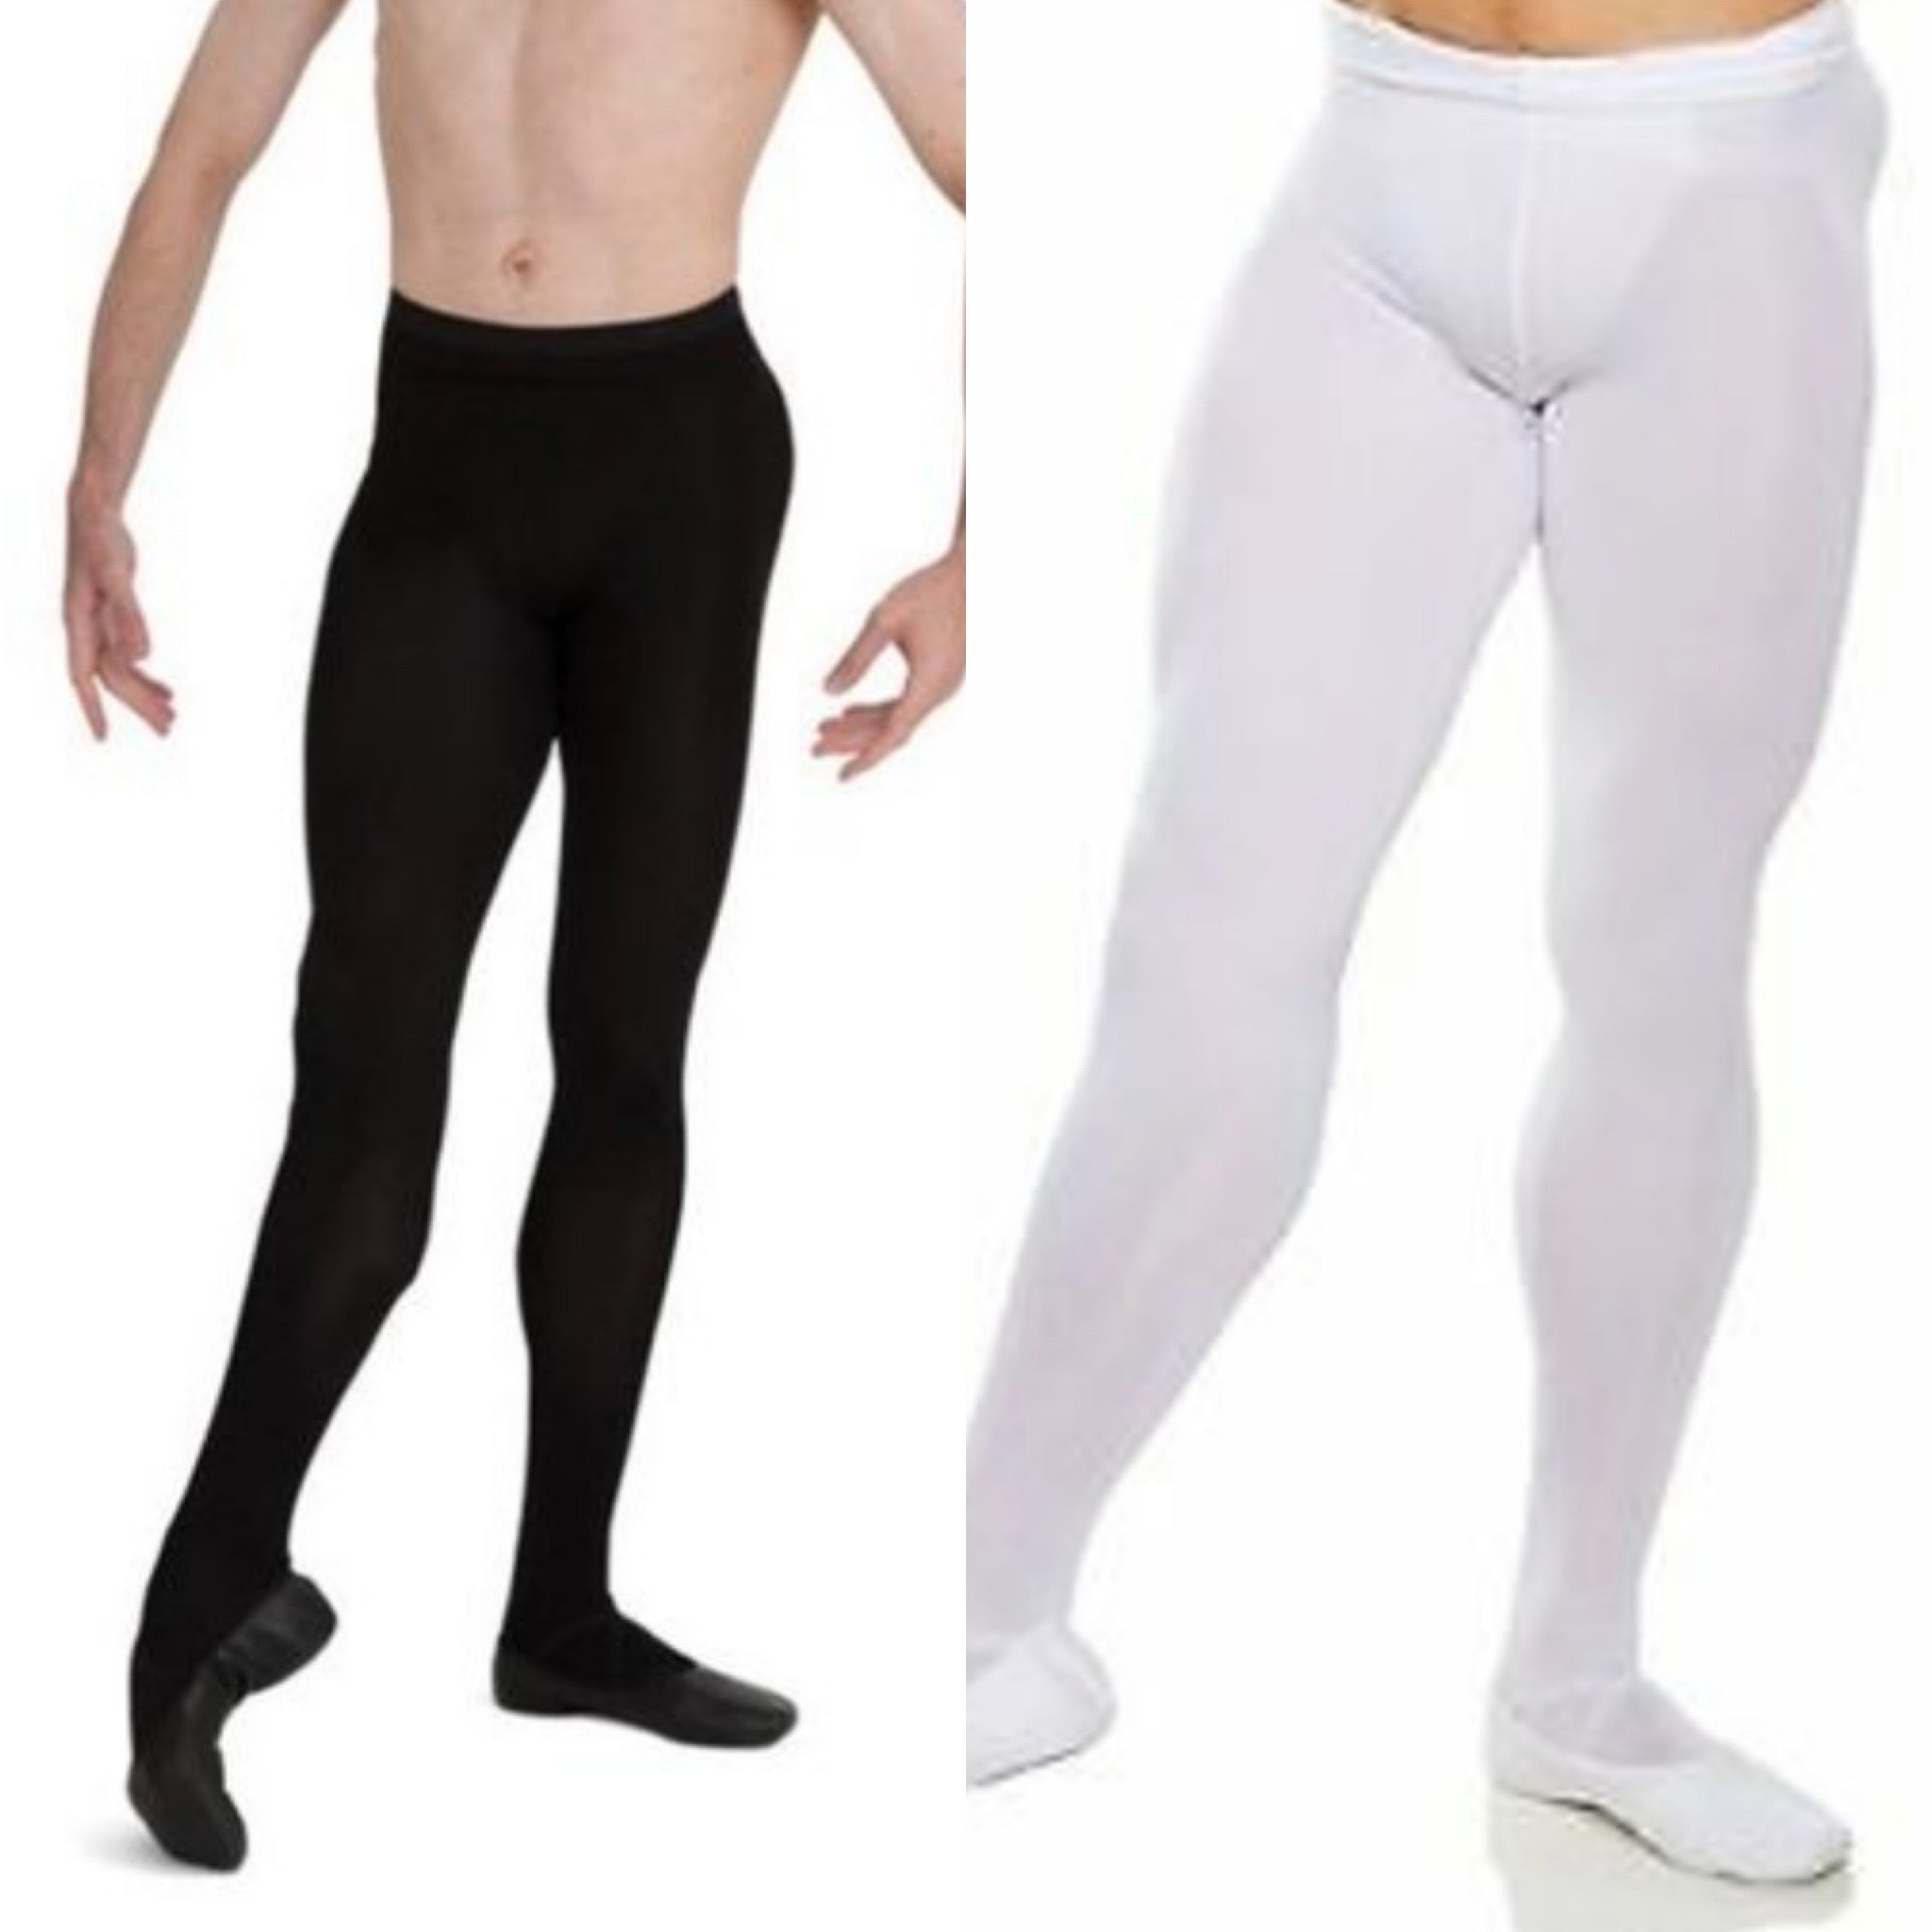 Men's Footed Tight with Back Seams